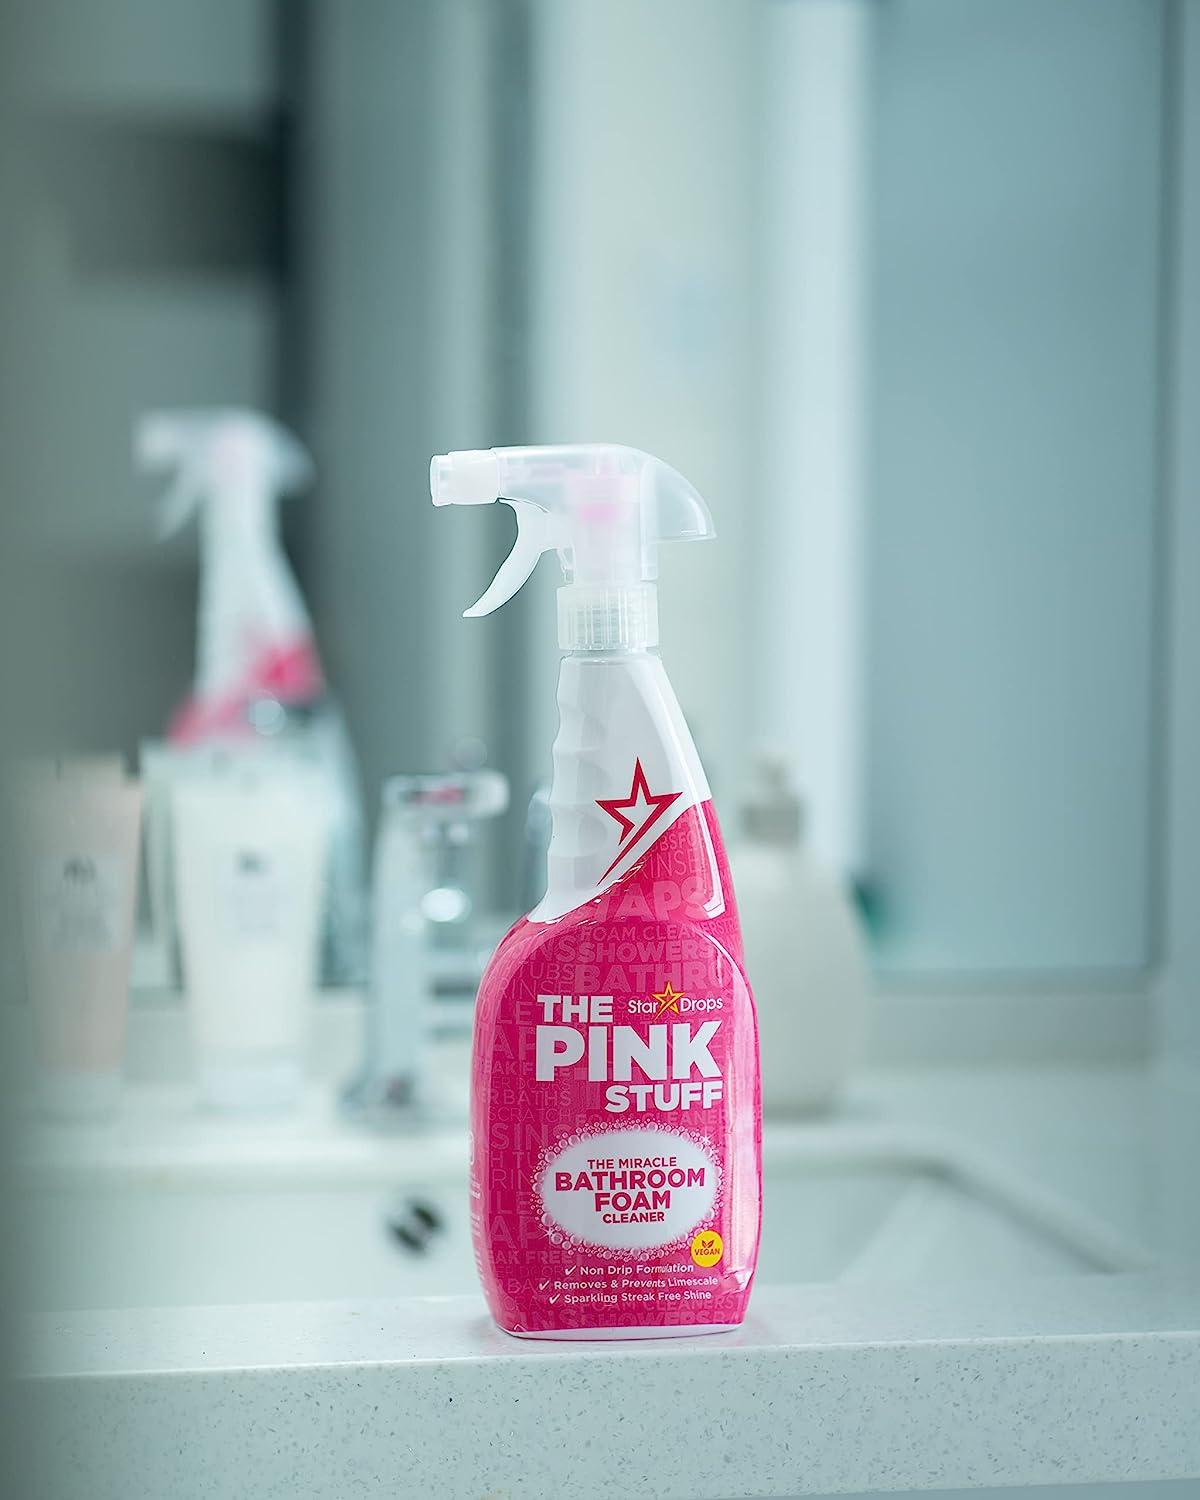  Stardrops - The Pink Stuff - The Miracle Multi-Purpose Cleaner  Spray- 25.36 Fl Oz : Health & Household